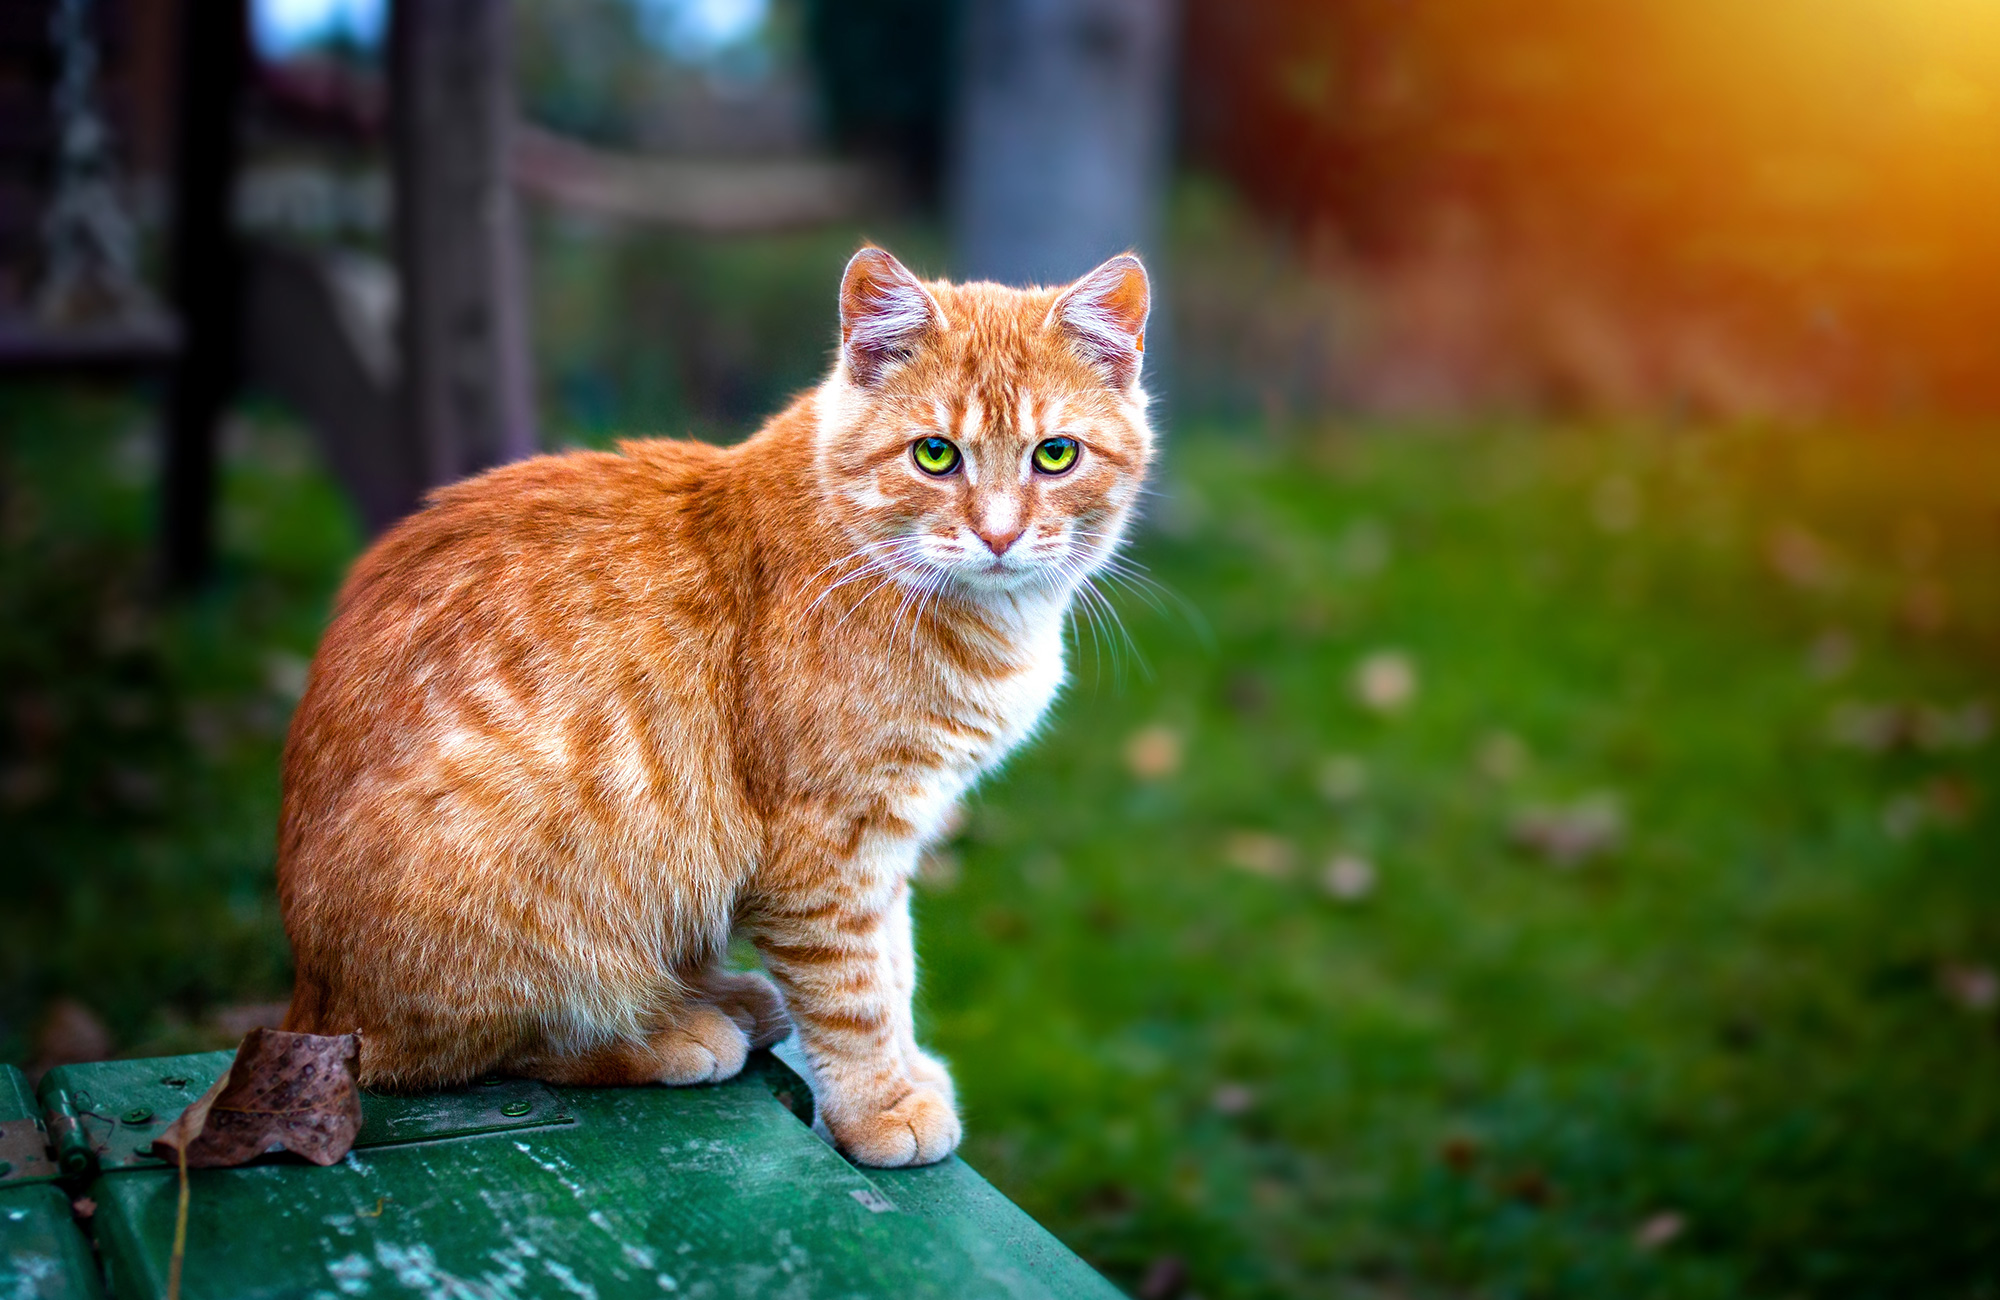 What Breed Is an Orange and White Cat？